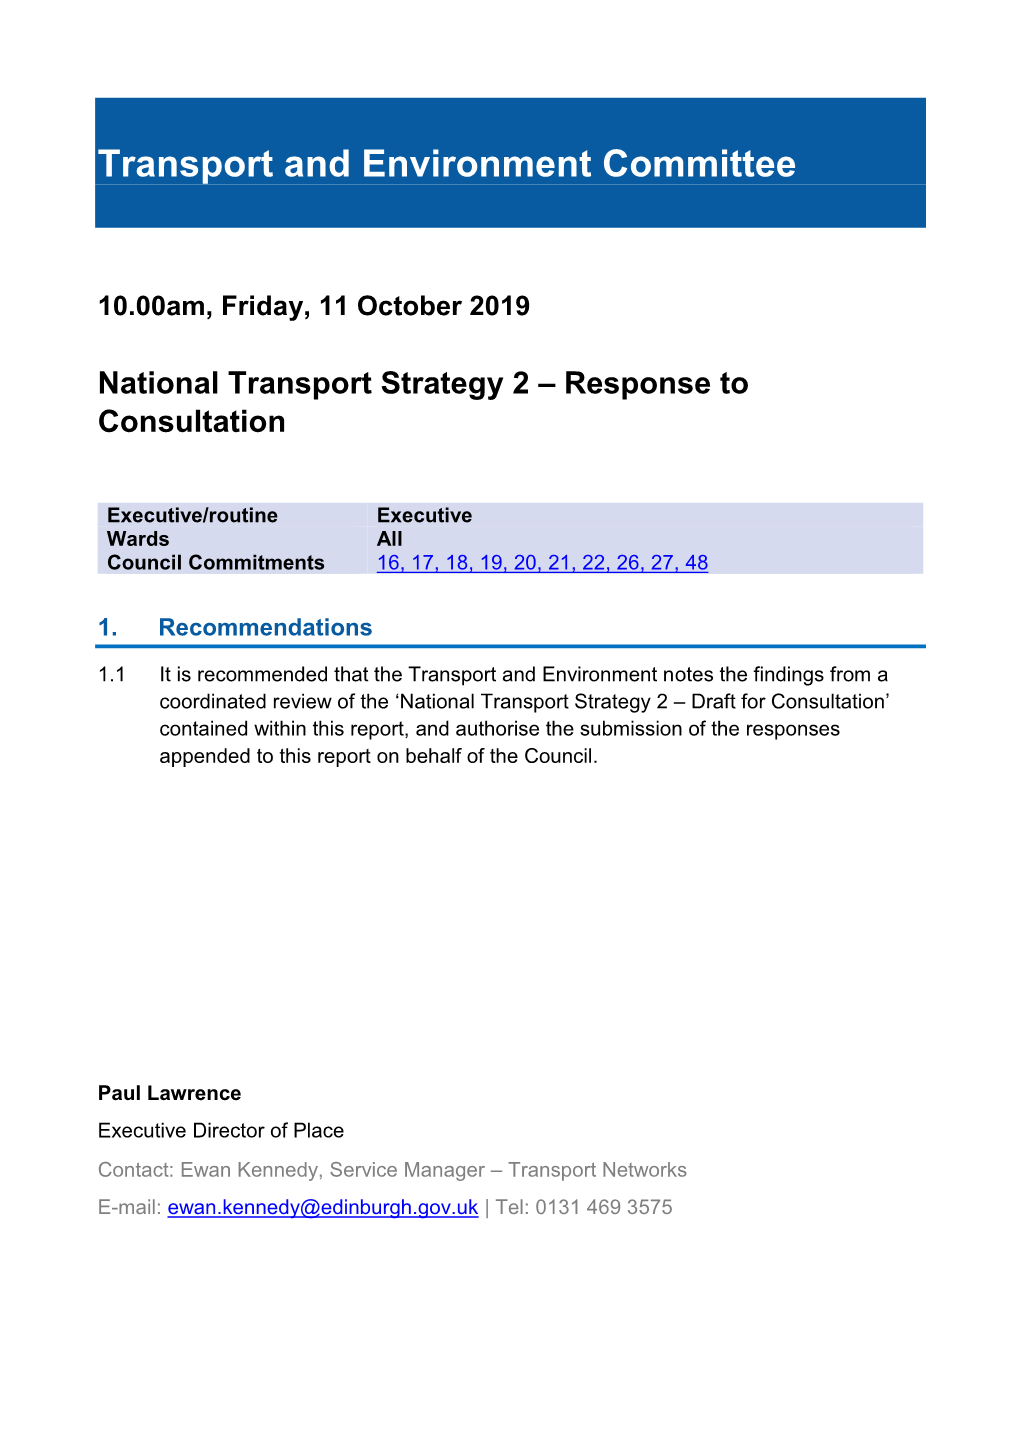 National Transport Strategy 2 – Response to Consultation